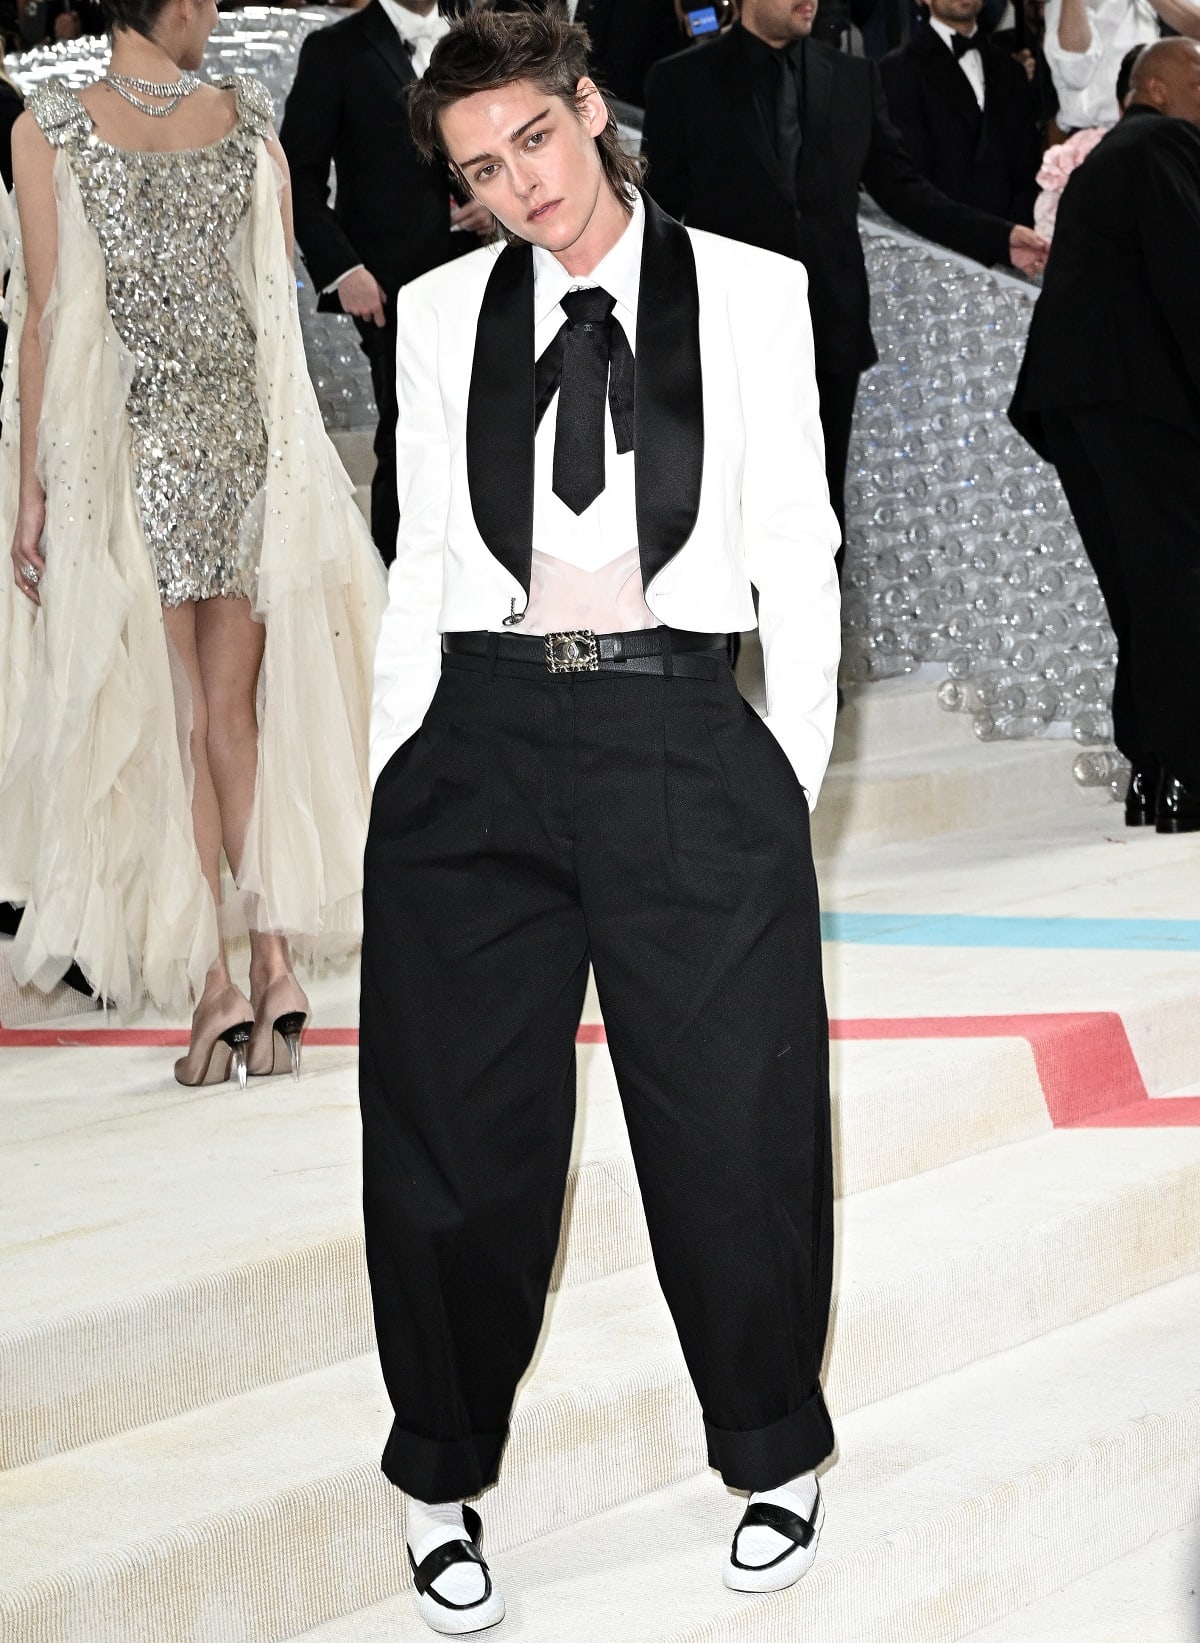 Kristen Stewart giving a nod to Karl Lagerfeld at the 2023 Met Gala